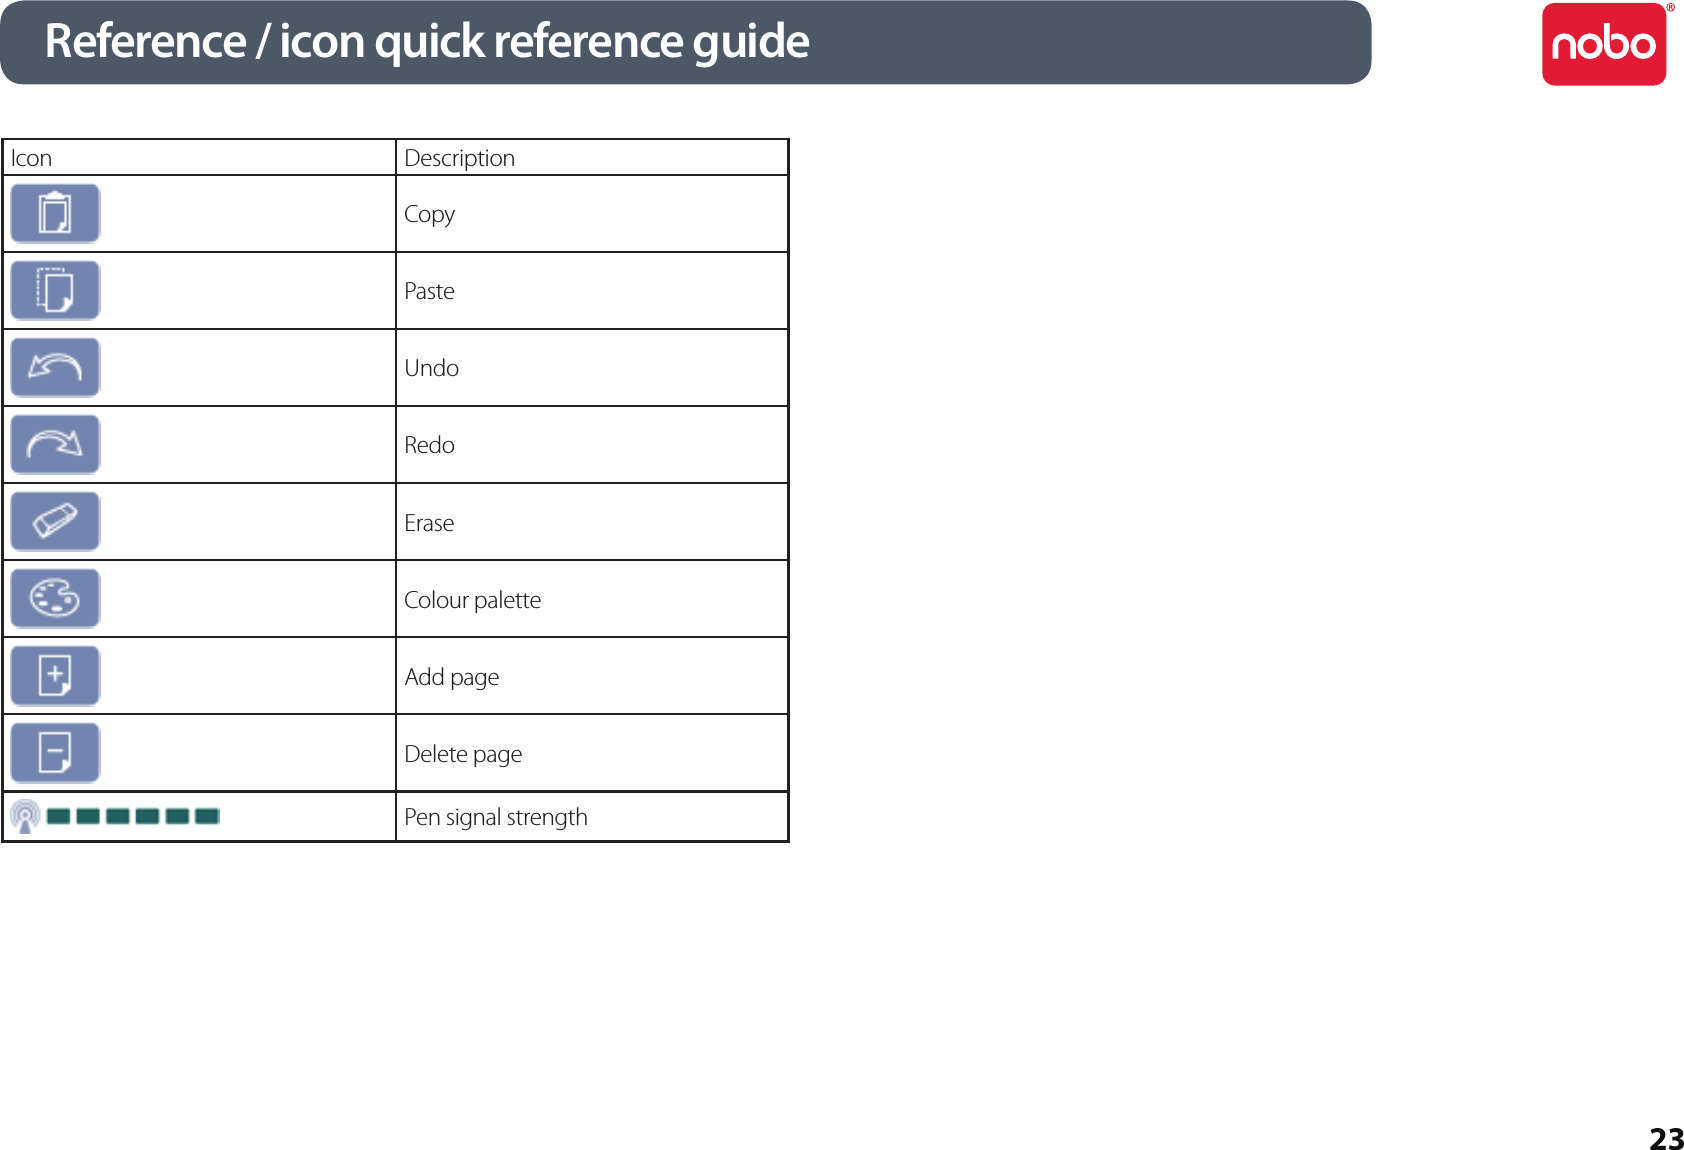 23Reference / icon quick reference guideIcon DescriptionCopyPasteUndoRedoEraseColour paletteAdd pageDelete pagePen signal strength